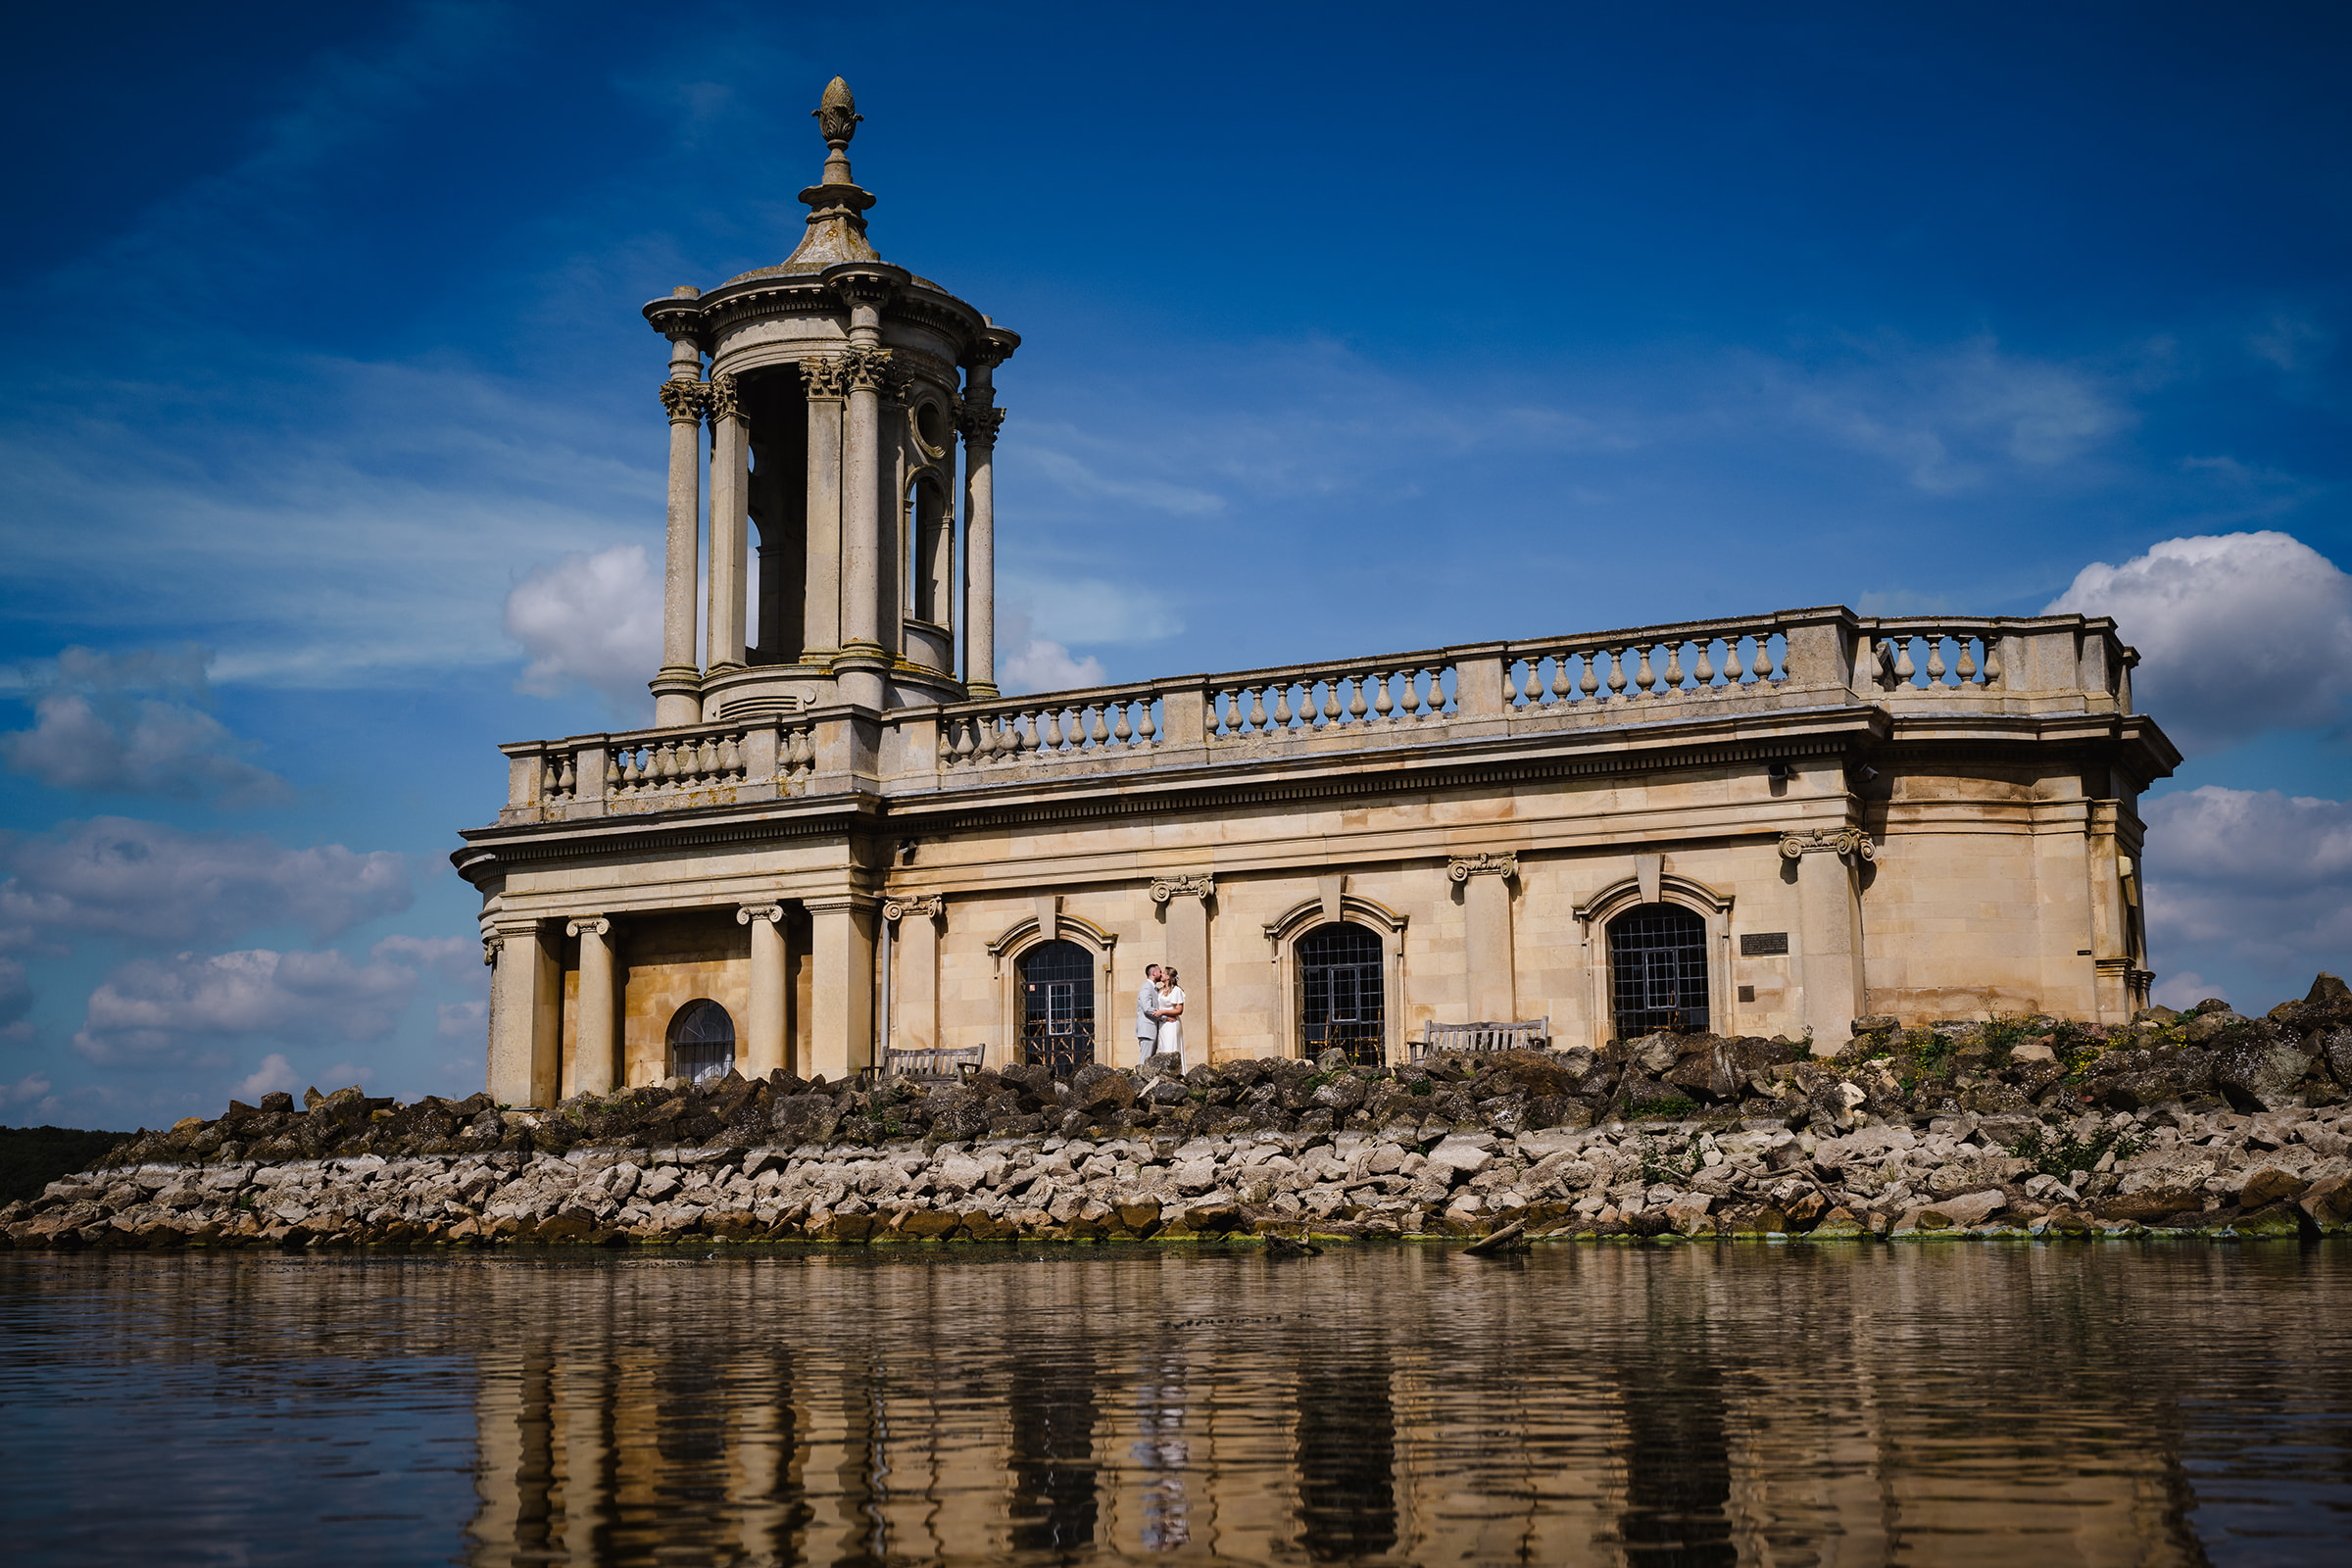 Normanton church reflected in the water